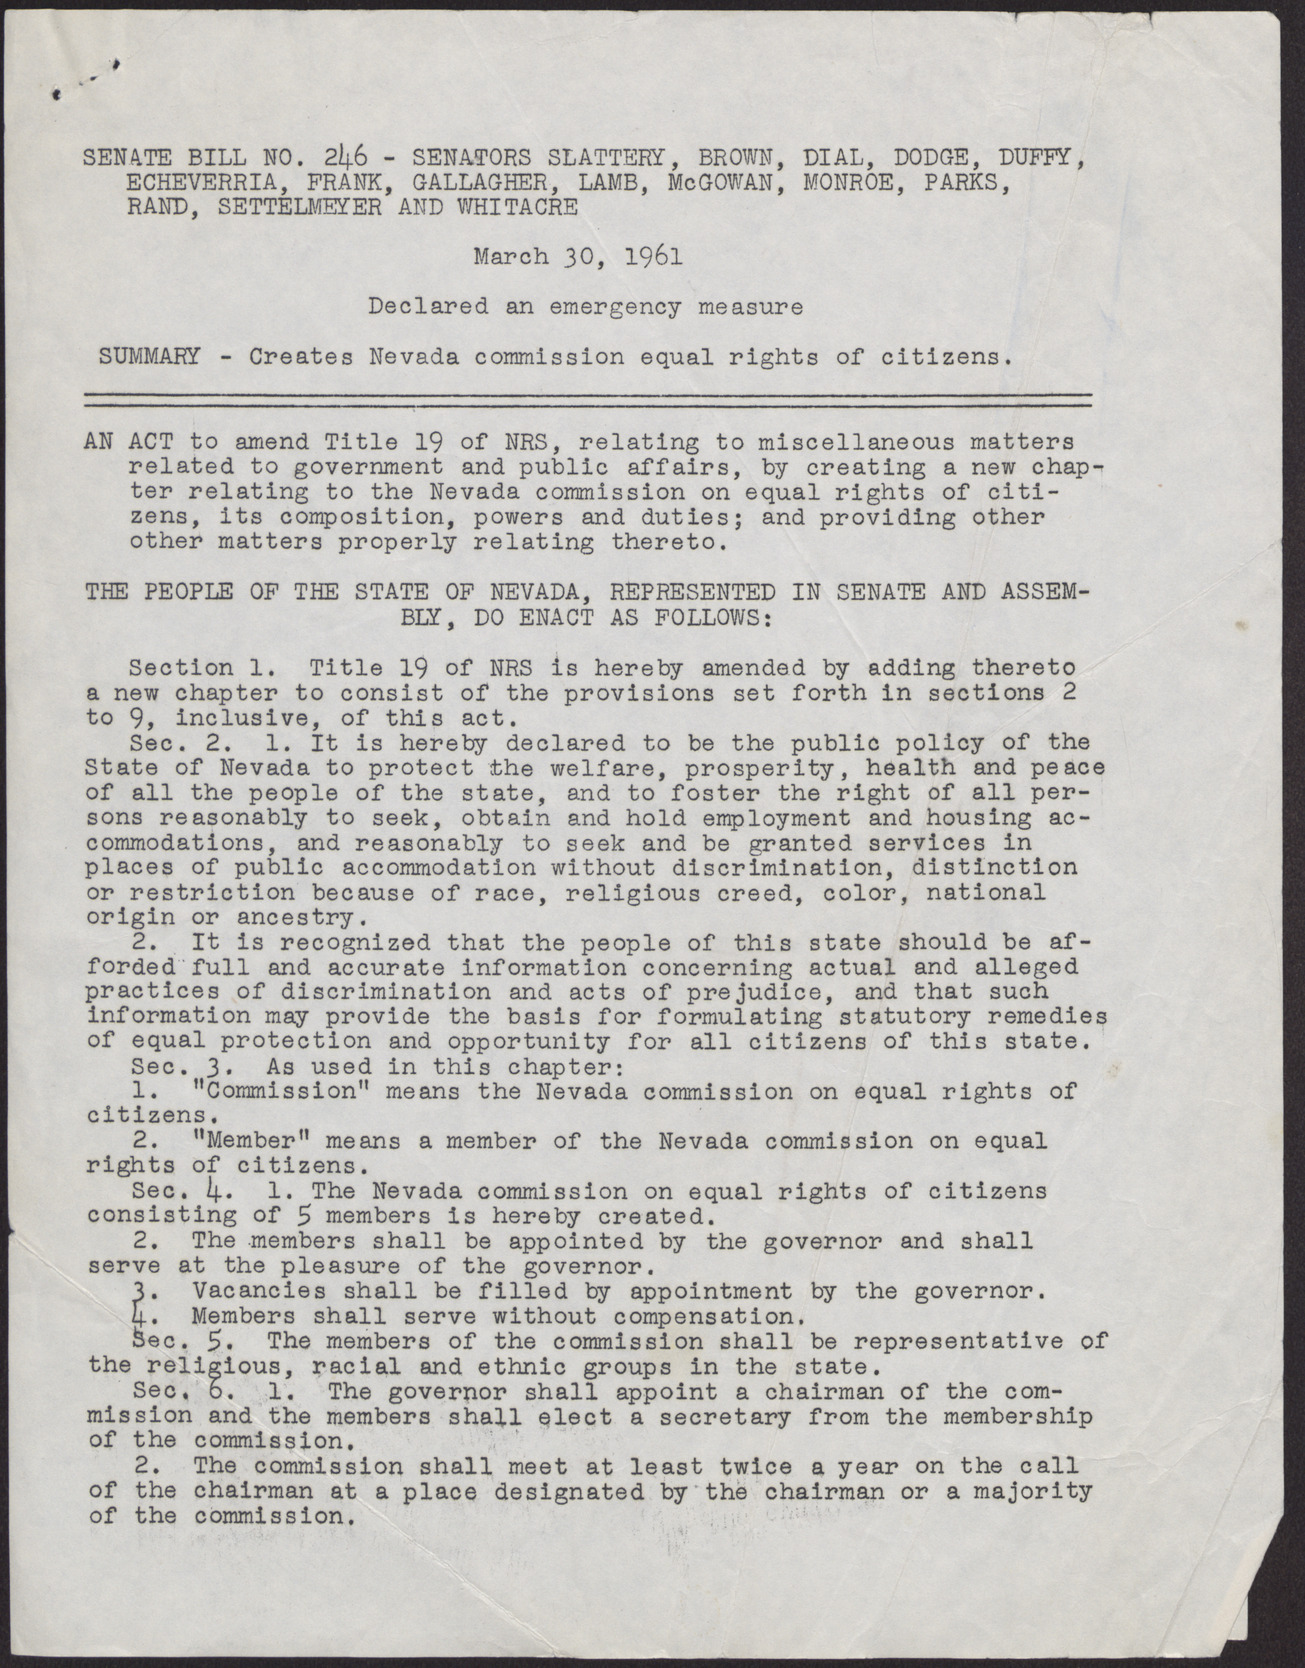 Summary of Senate Bill No. 246 (2 pages), March 30, 1961